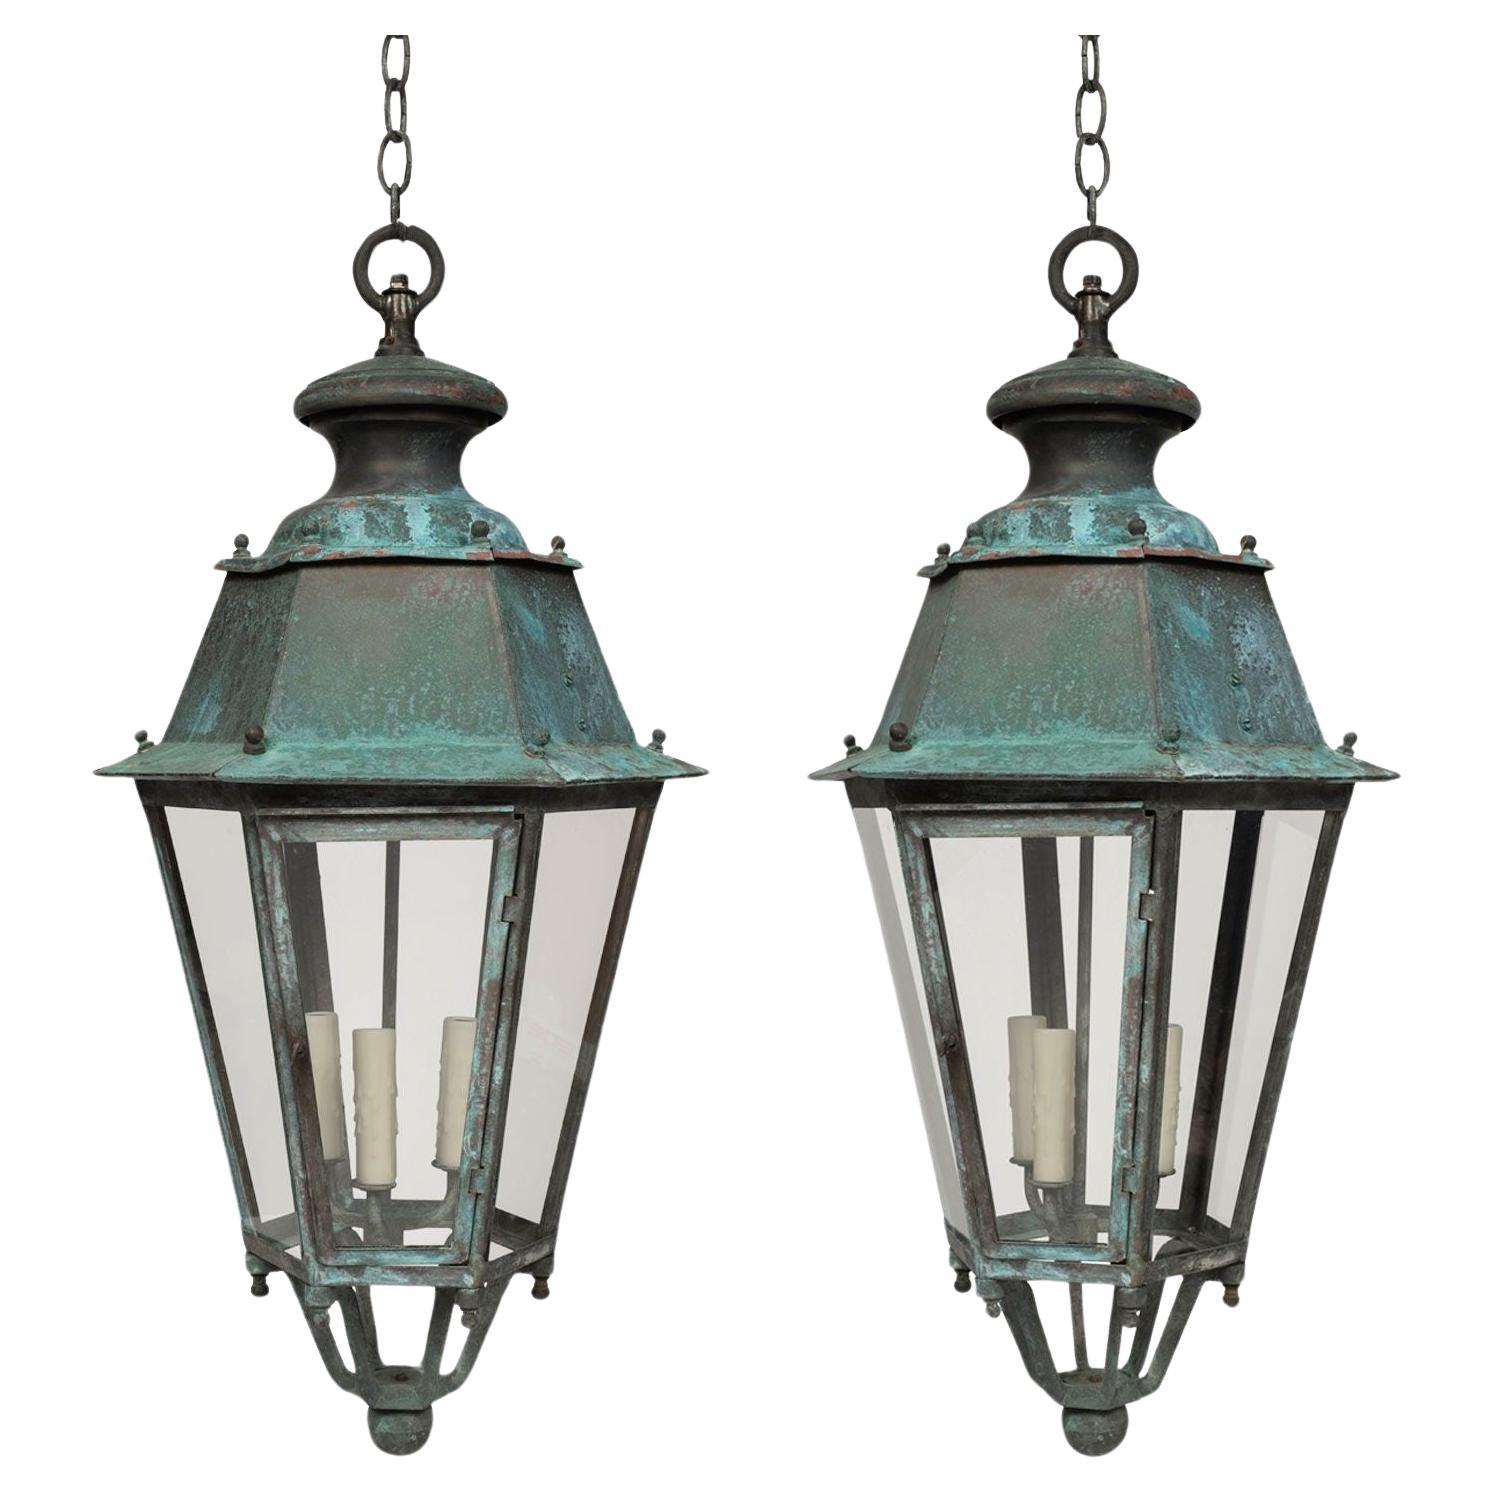 Pair of 19th Century French Copper and Glass Paneled Lanterns For Sale